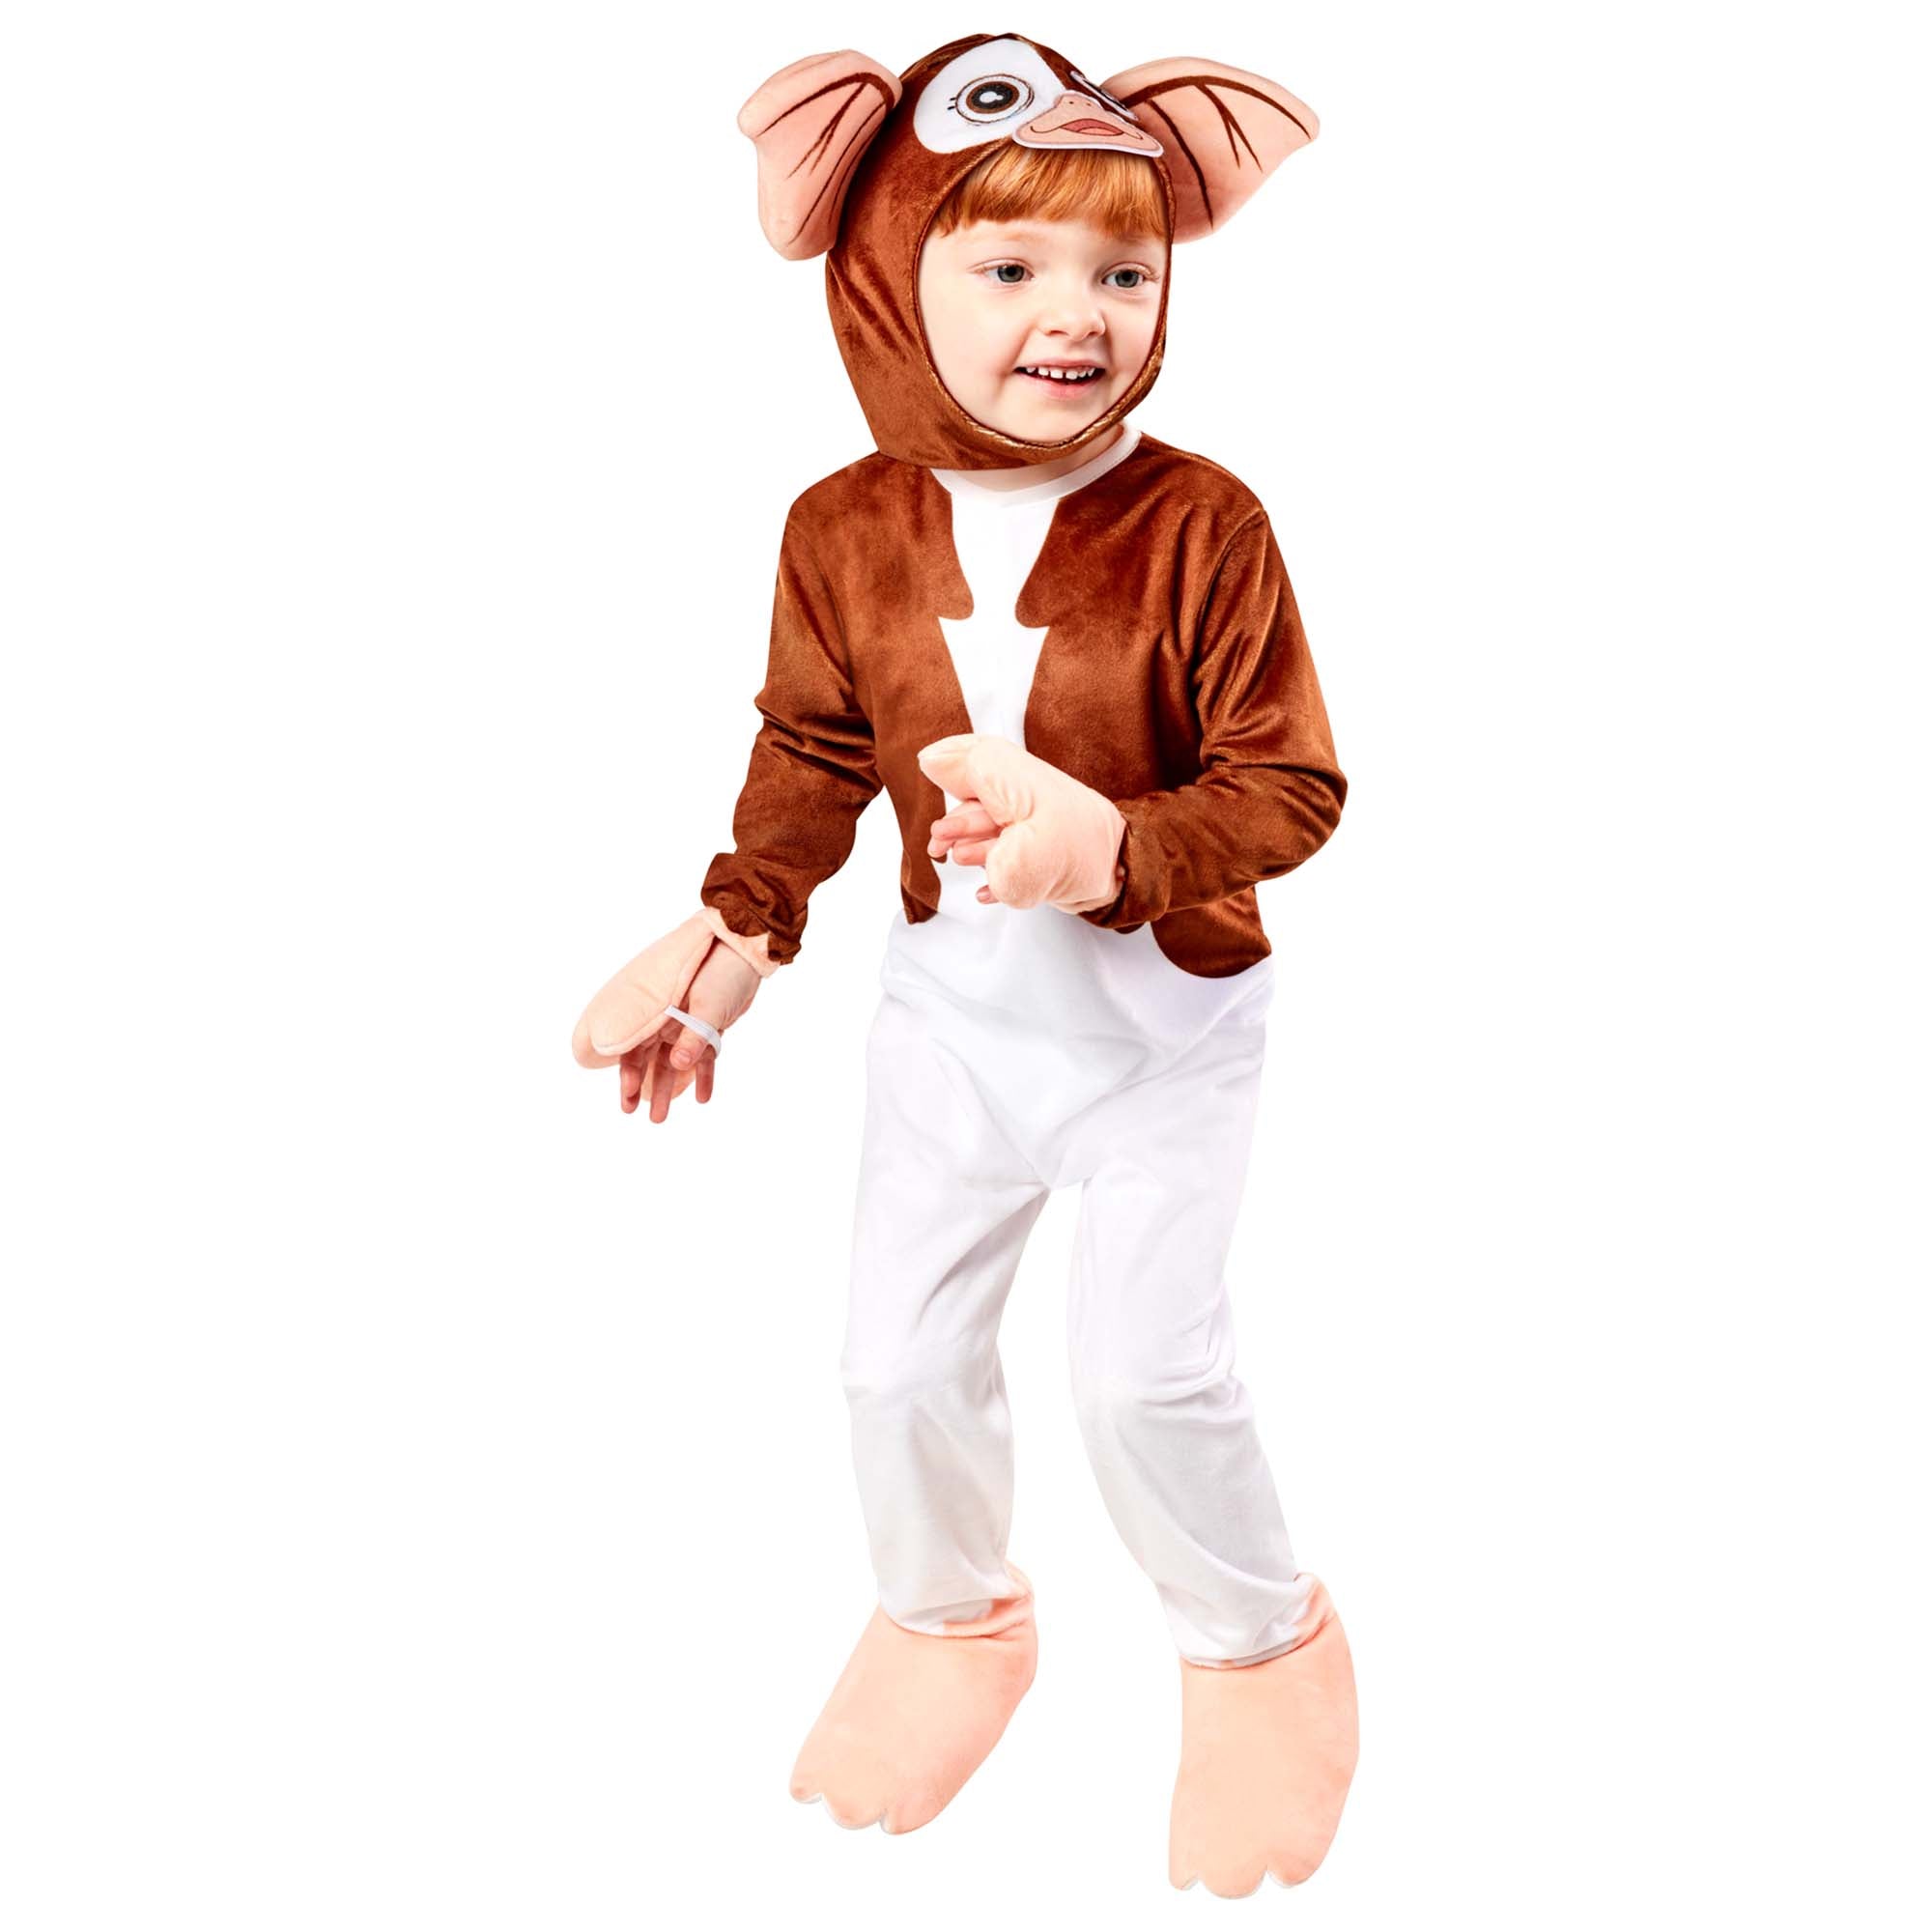 Gremlins Gizmo Costume for Babies and Toddlers